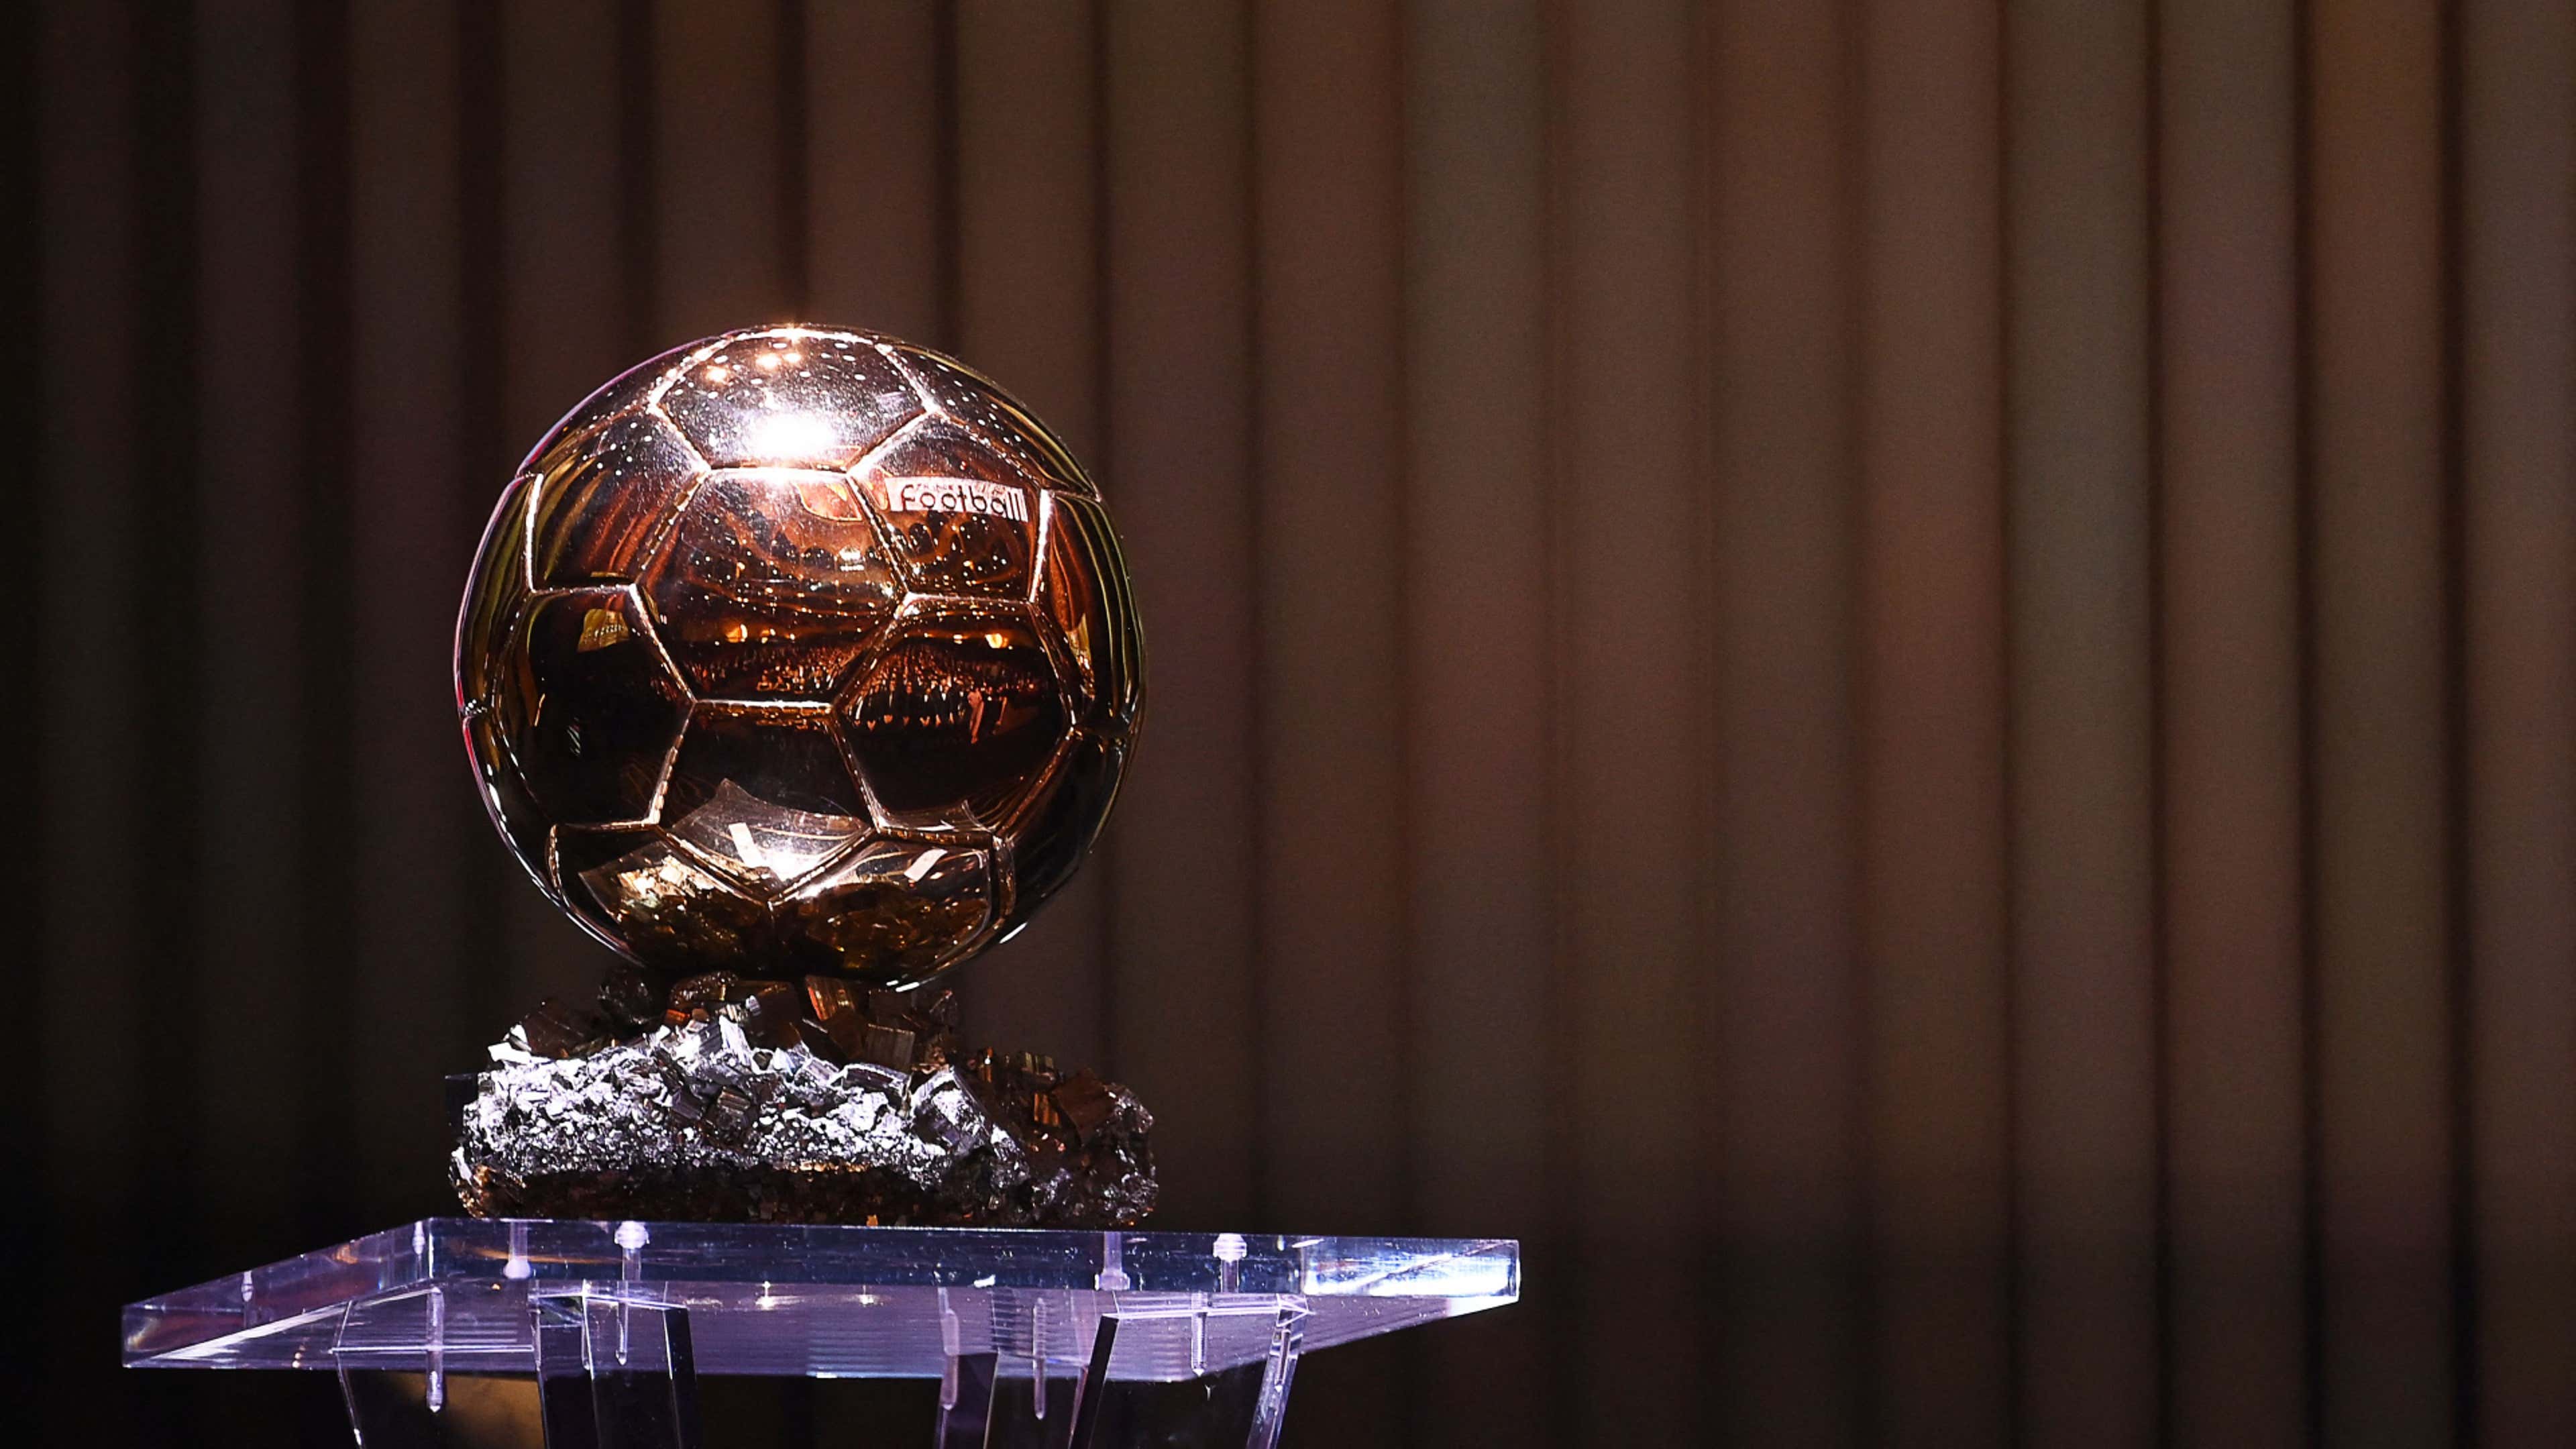 Ballon d'Or 2021: What was the selection process for voting?